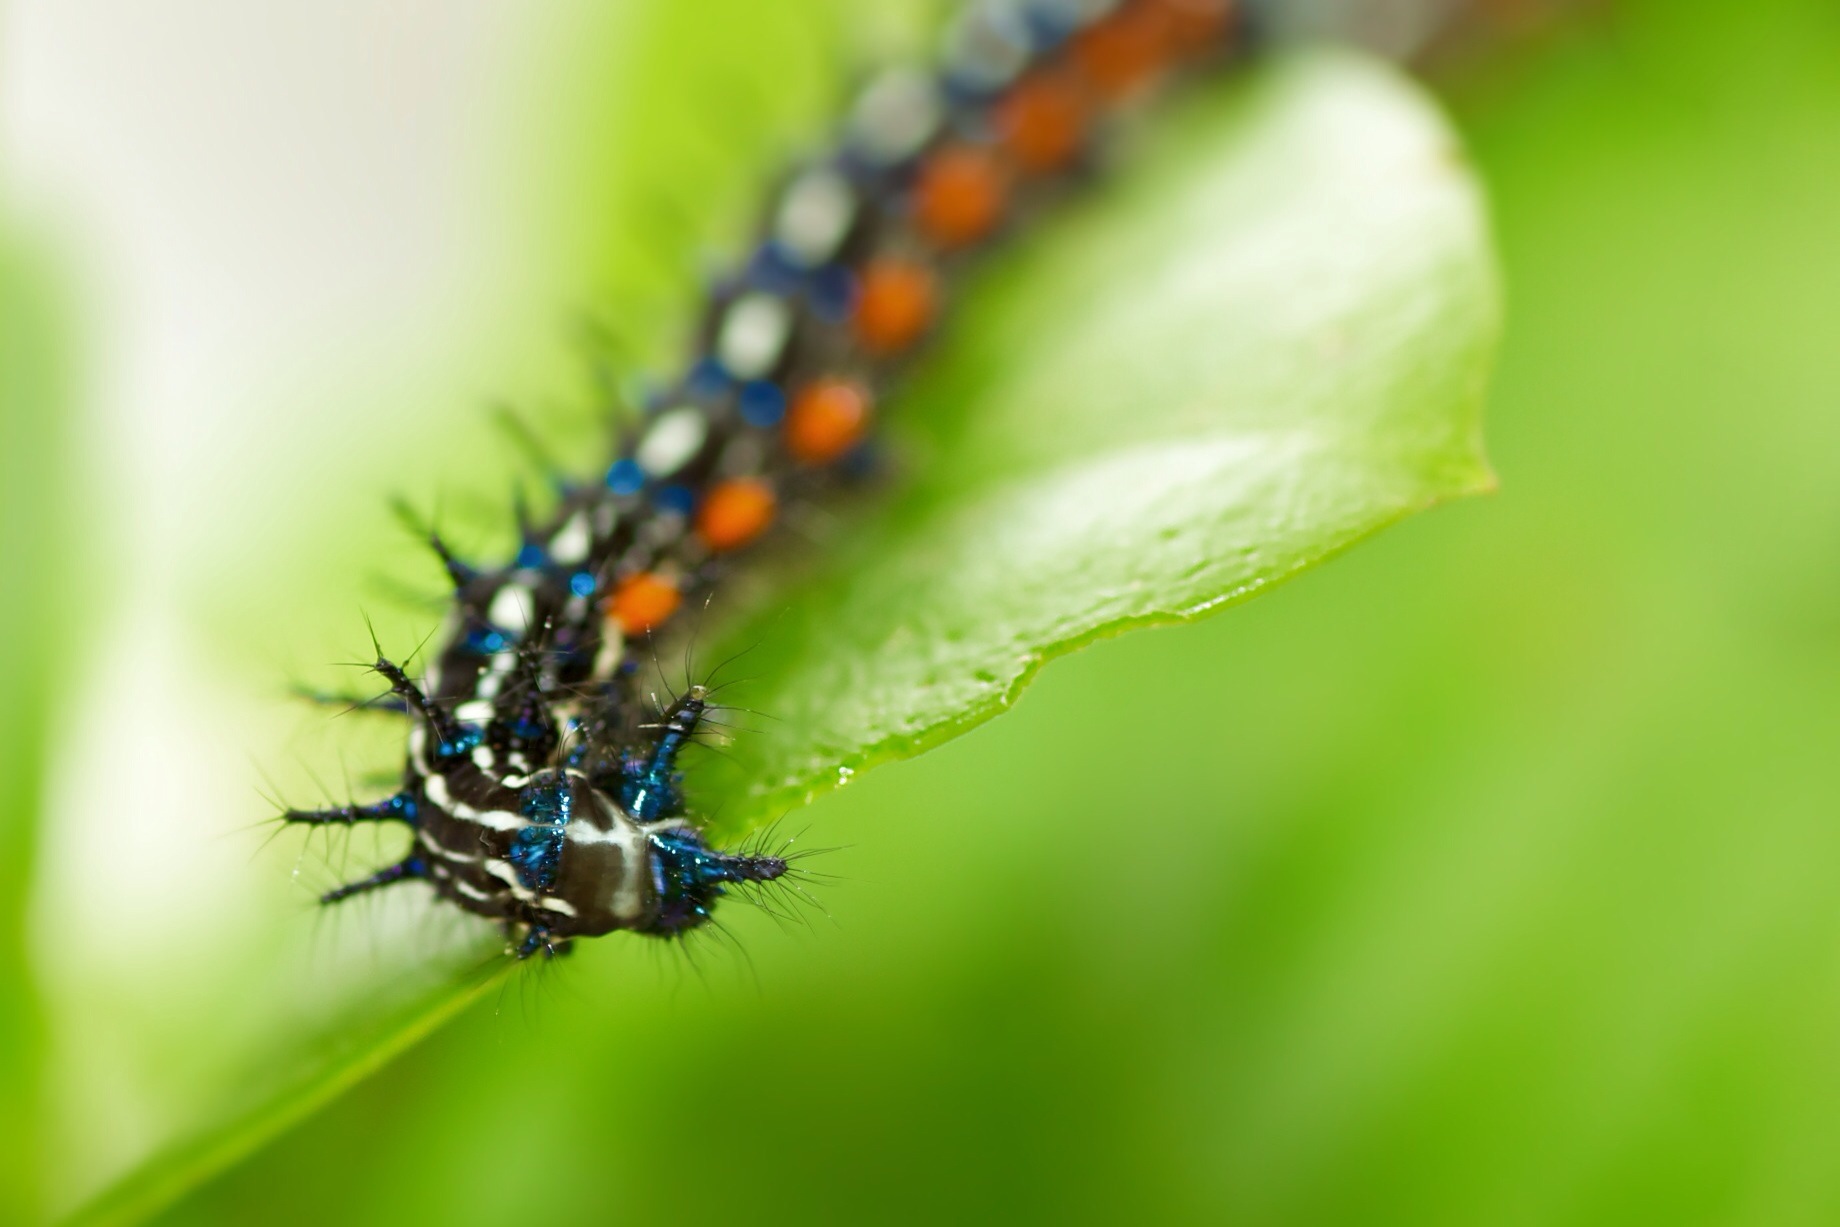 the blue and black caterpillar is crawling on a leaf